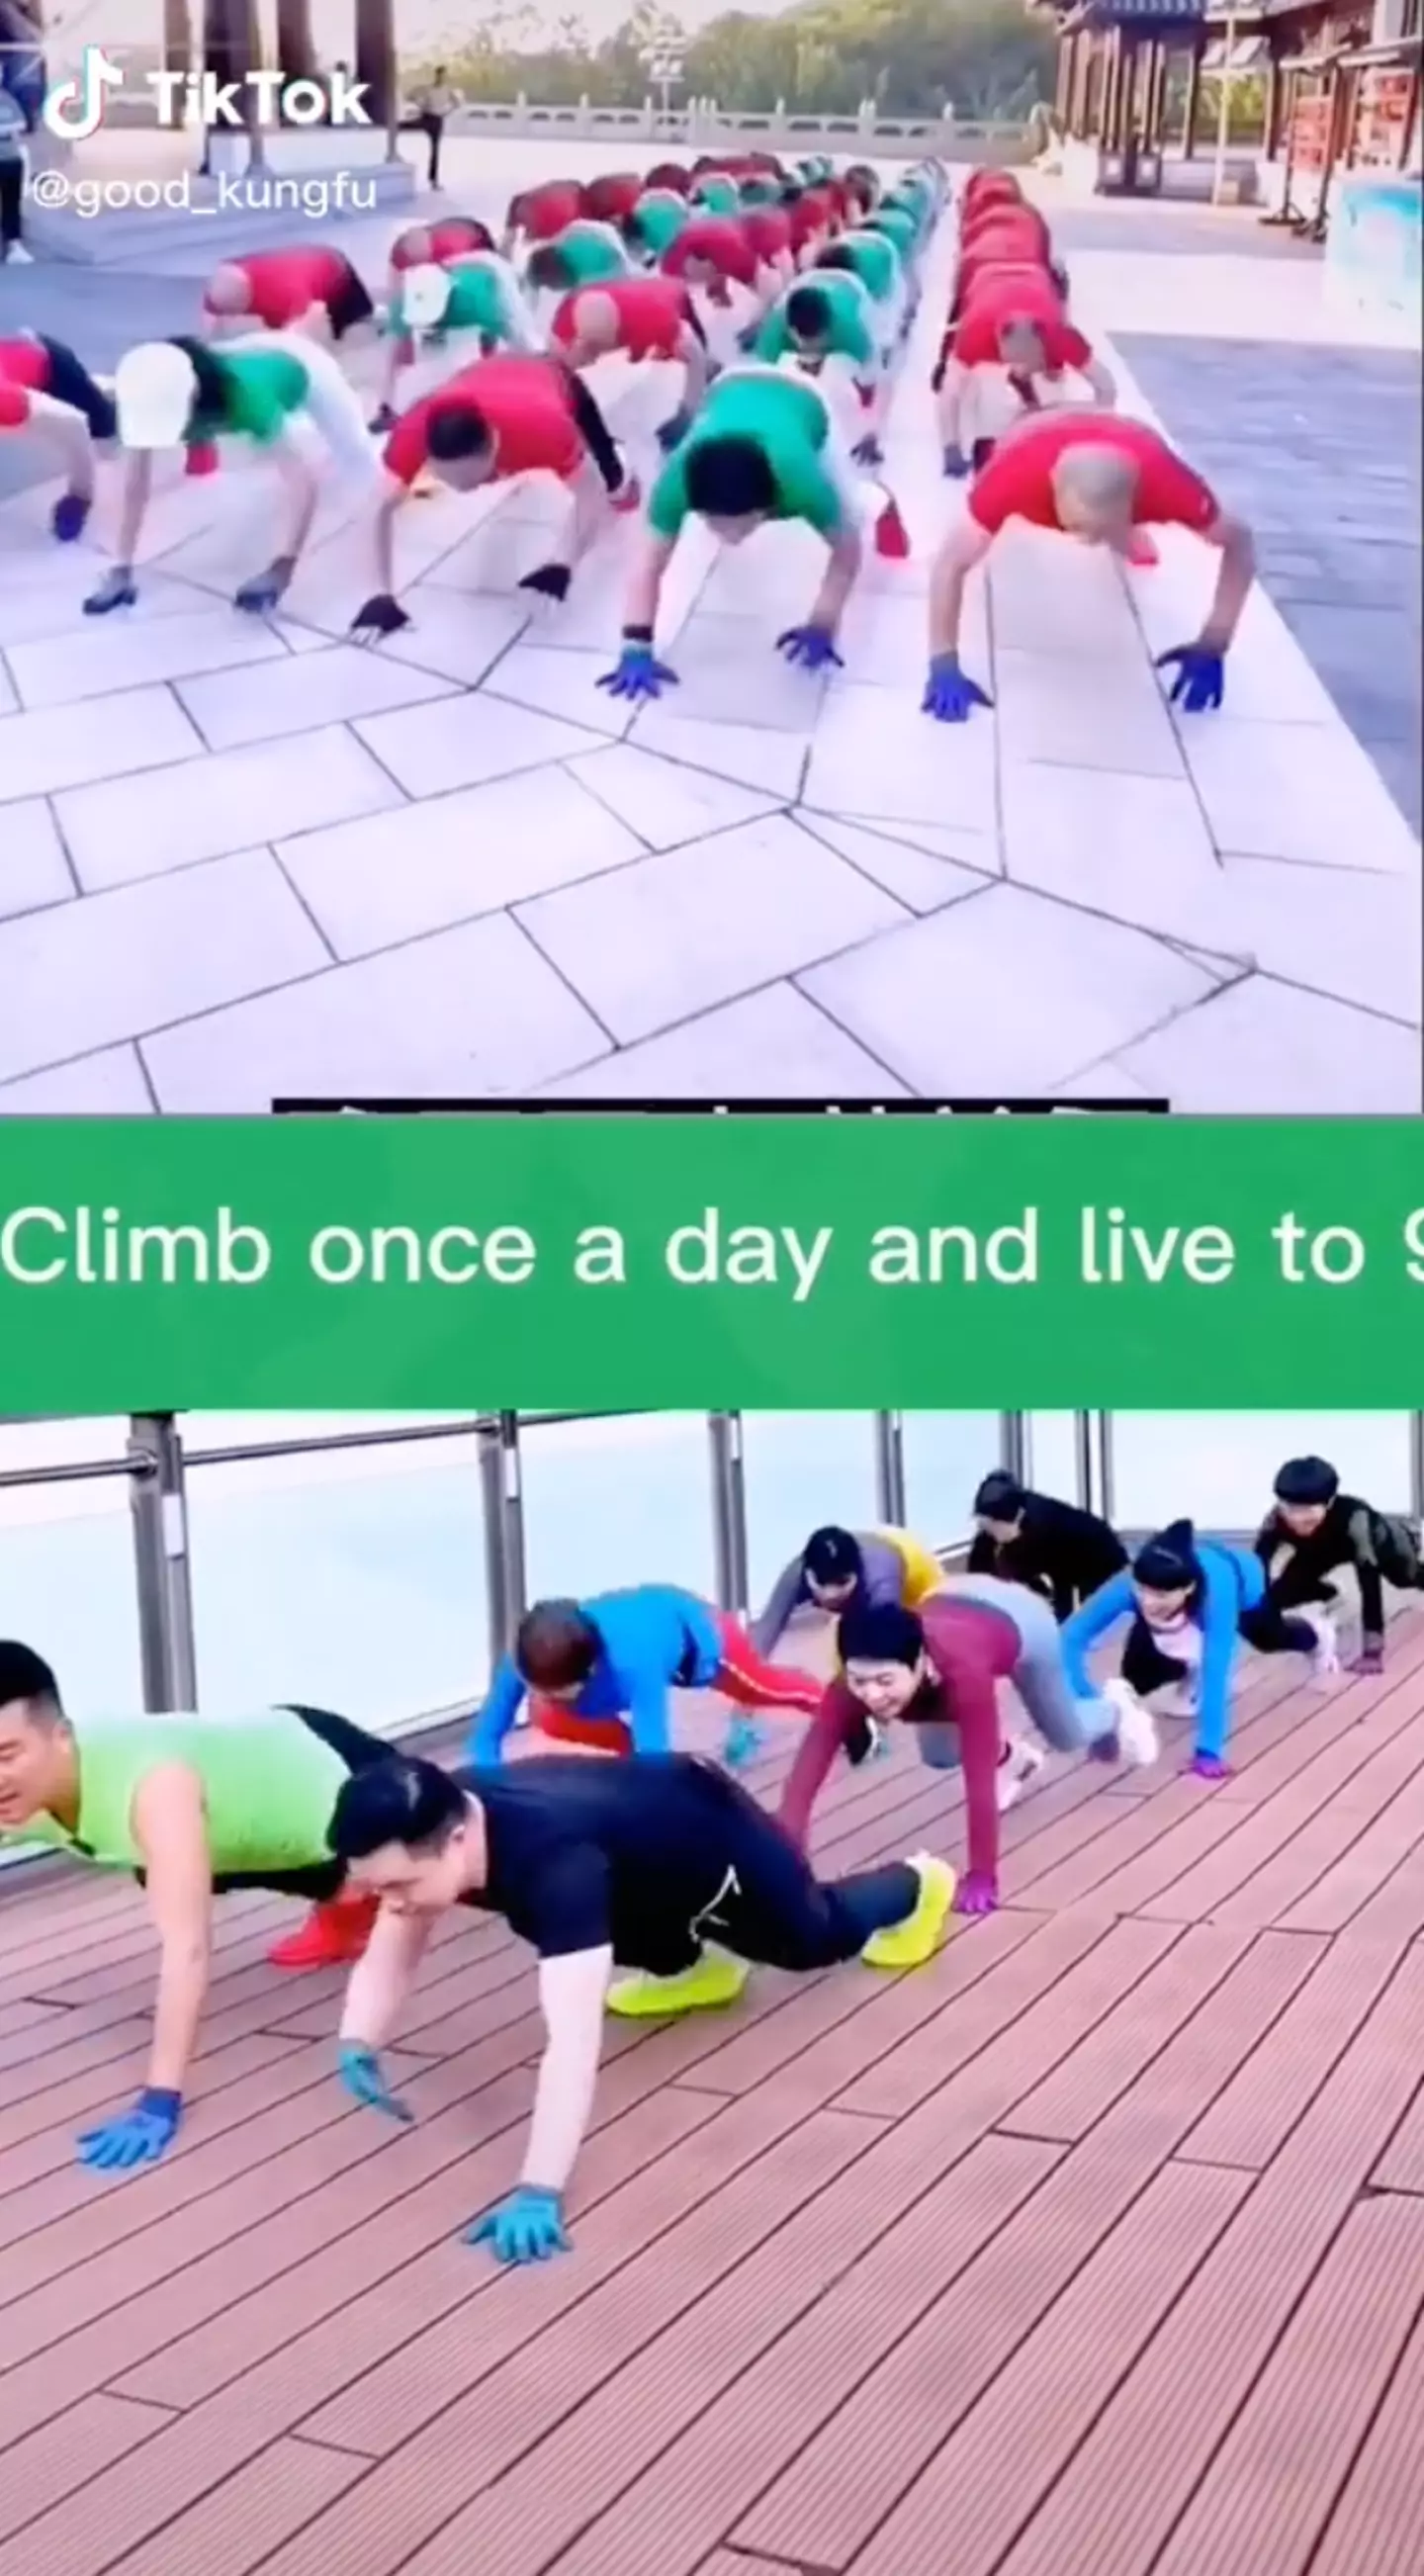 This video claims that climbing 'once a day' can increase life expectancy.